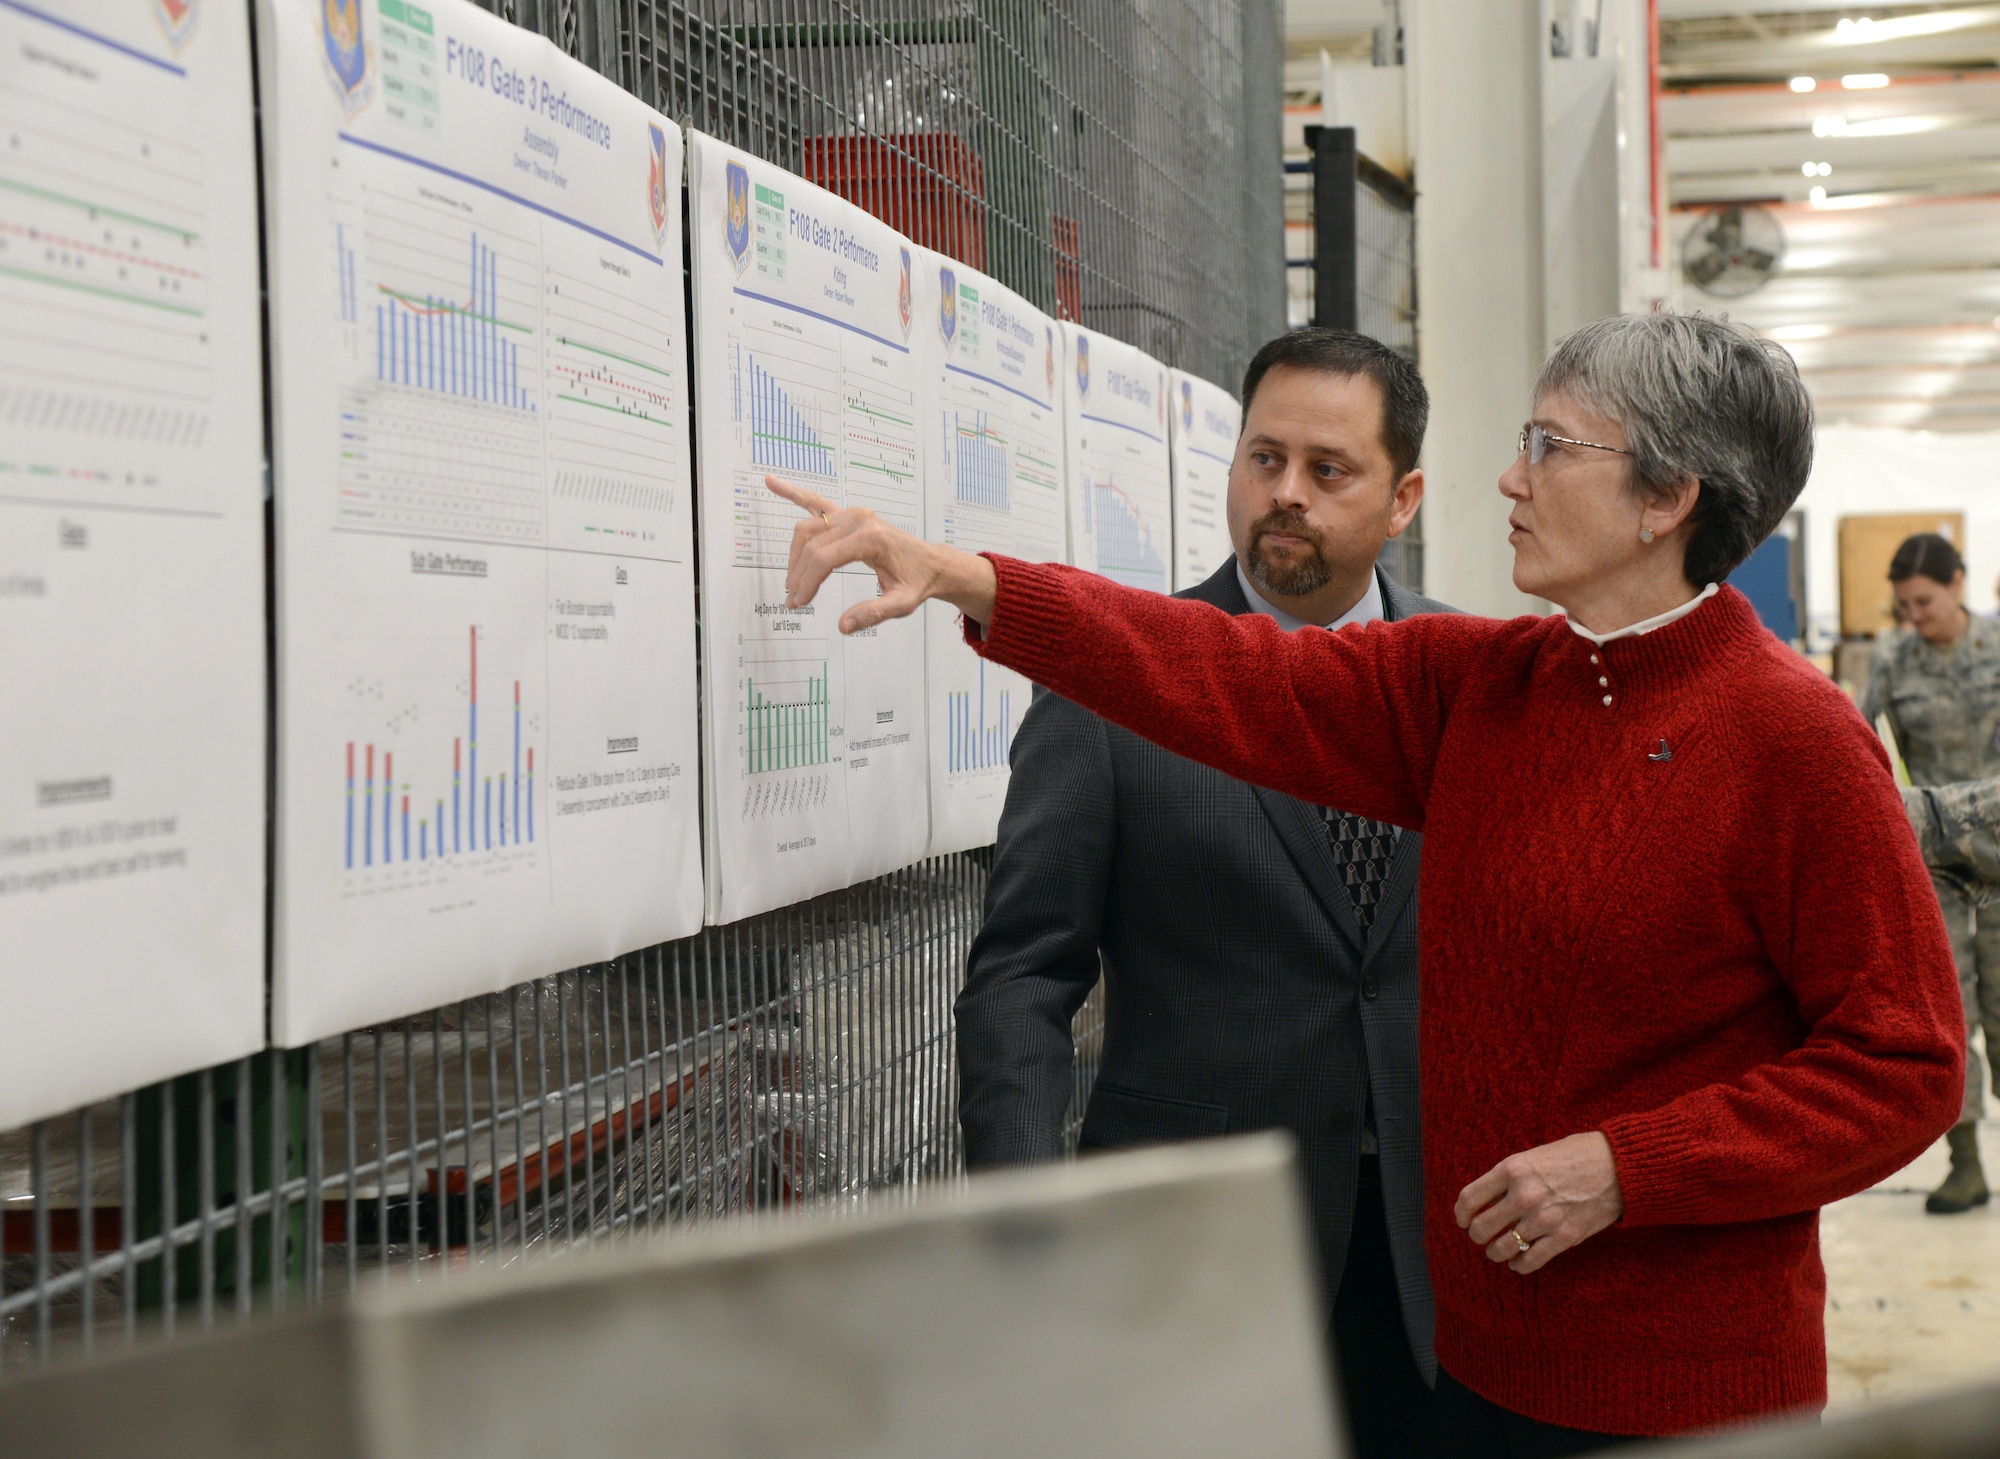 Secretary of the Air Force Heather Wilson asks Blake Johnson, 546th Propulsion Maintenance Squadron, questions about the F108 gated process during her visit to Tinker Air Force Base Nov. 16. The F108 engine line production has achieved Art of the Possible success.